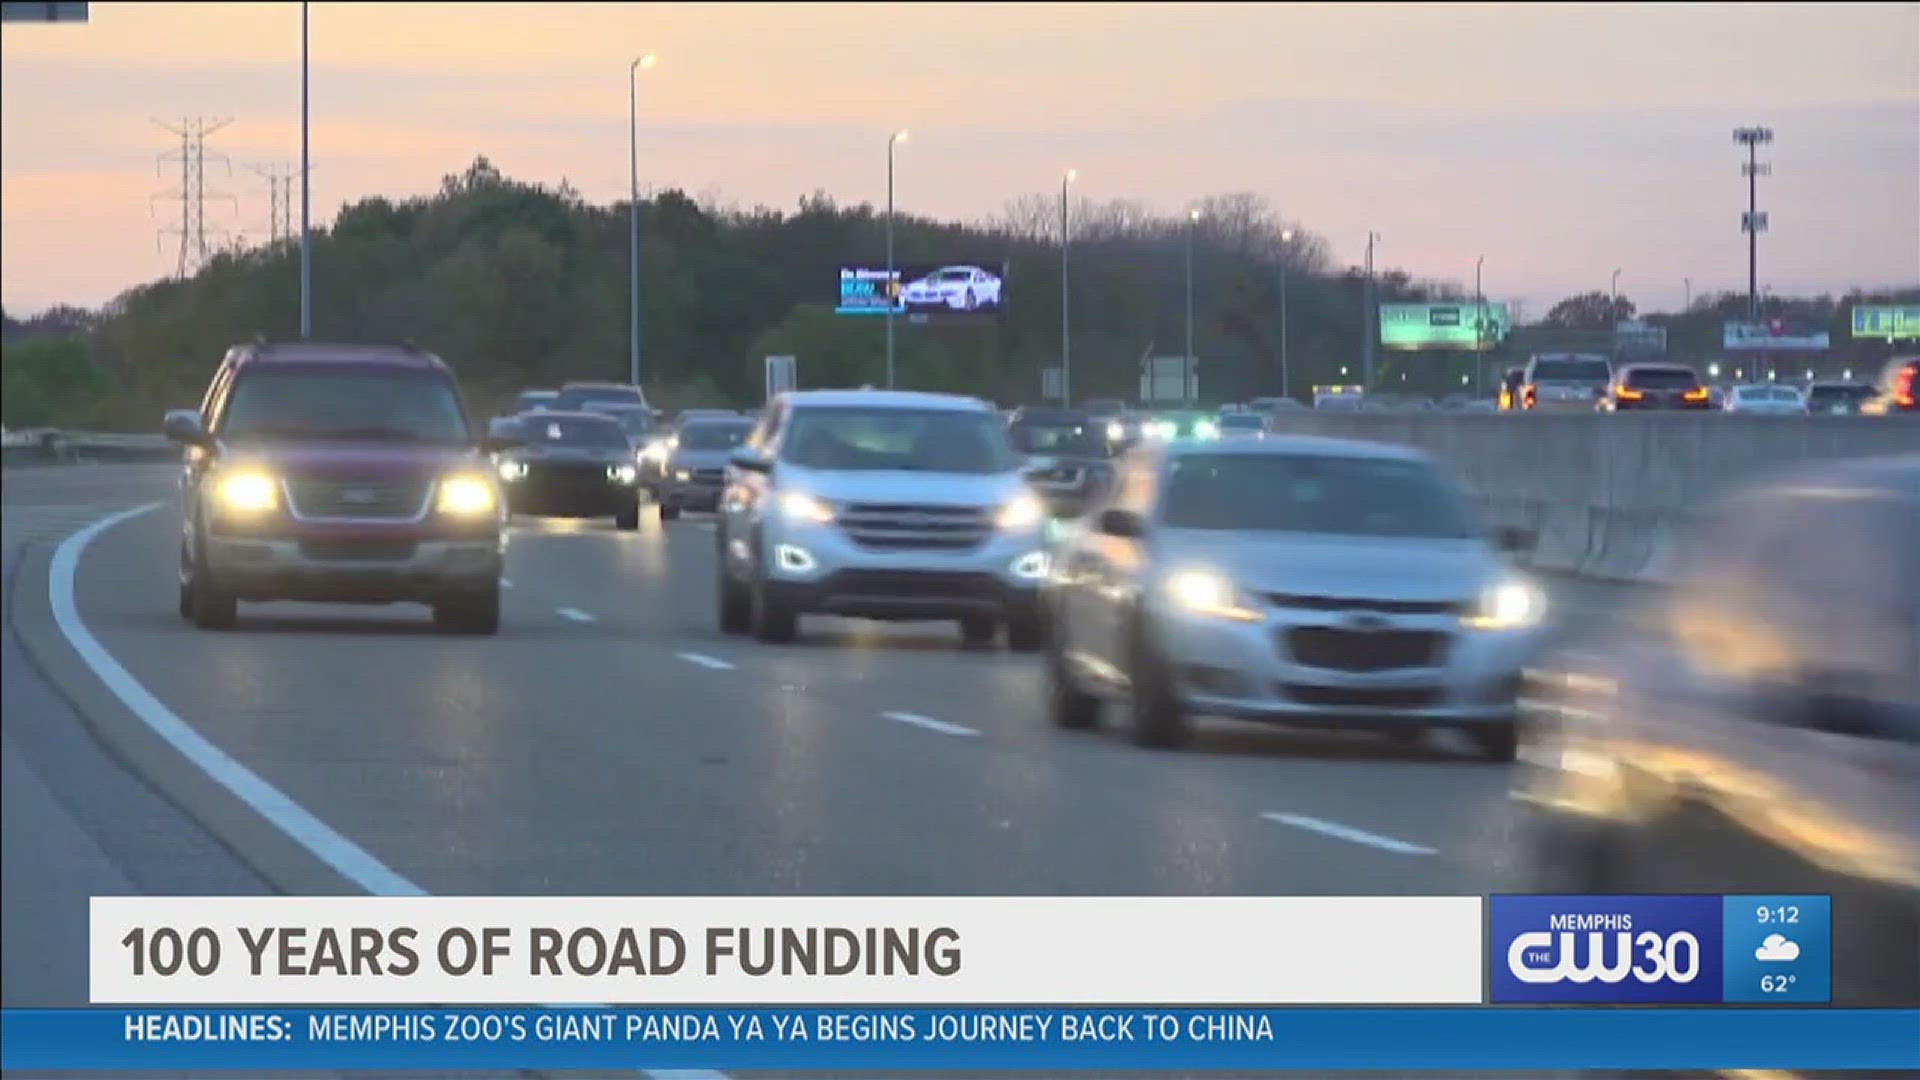 The group said 2023 marks a hundred years of Tennessee having sustainable funding for roads.